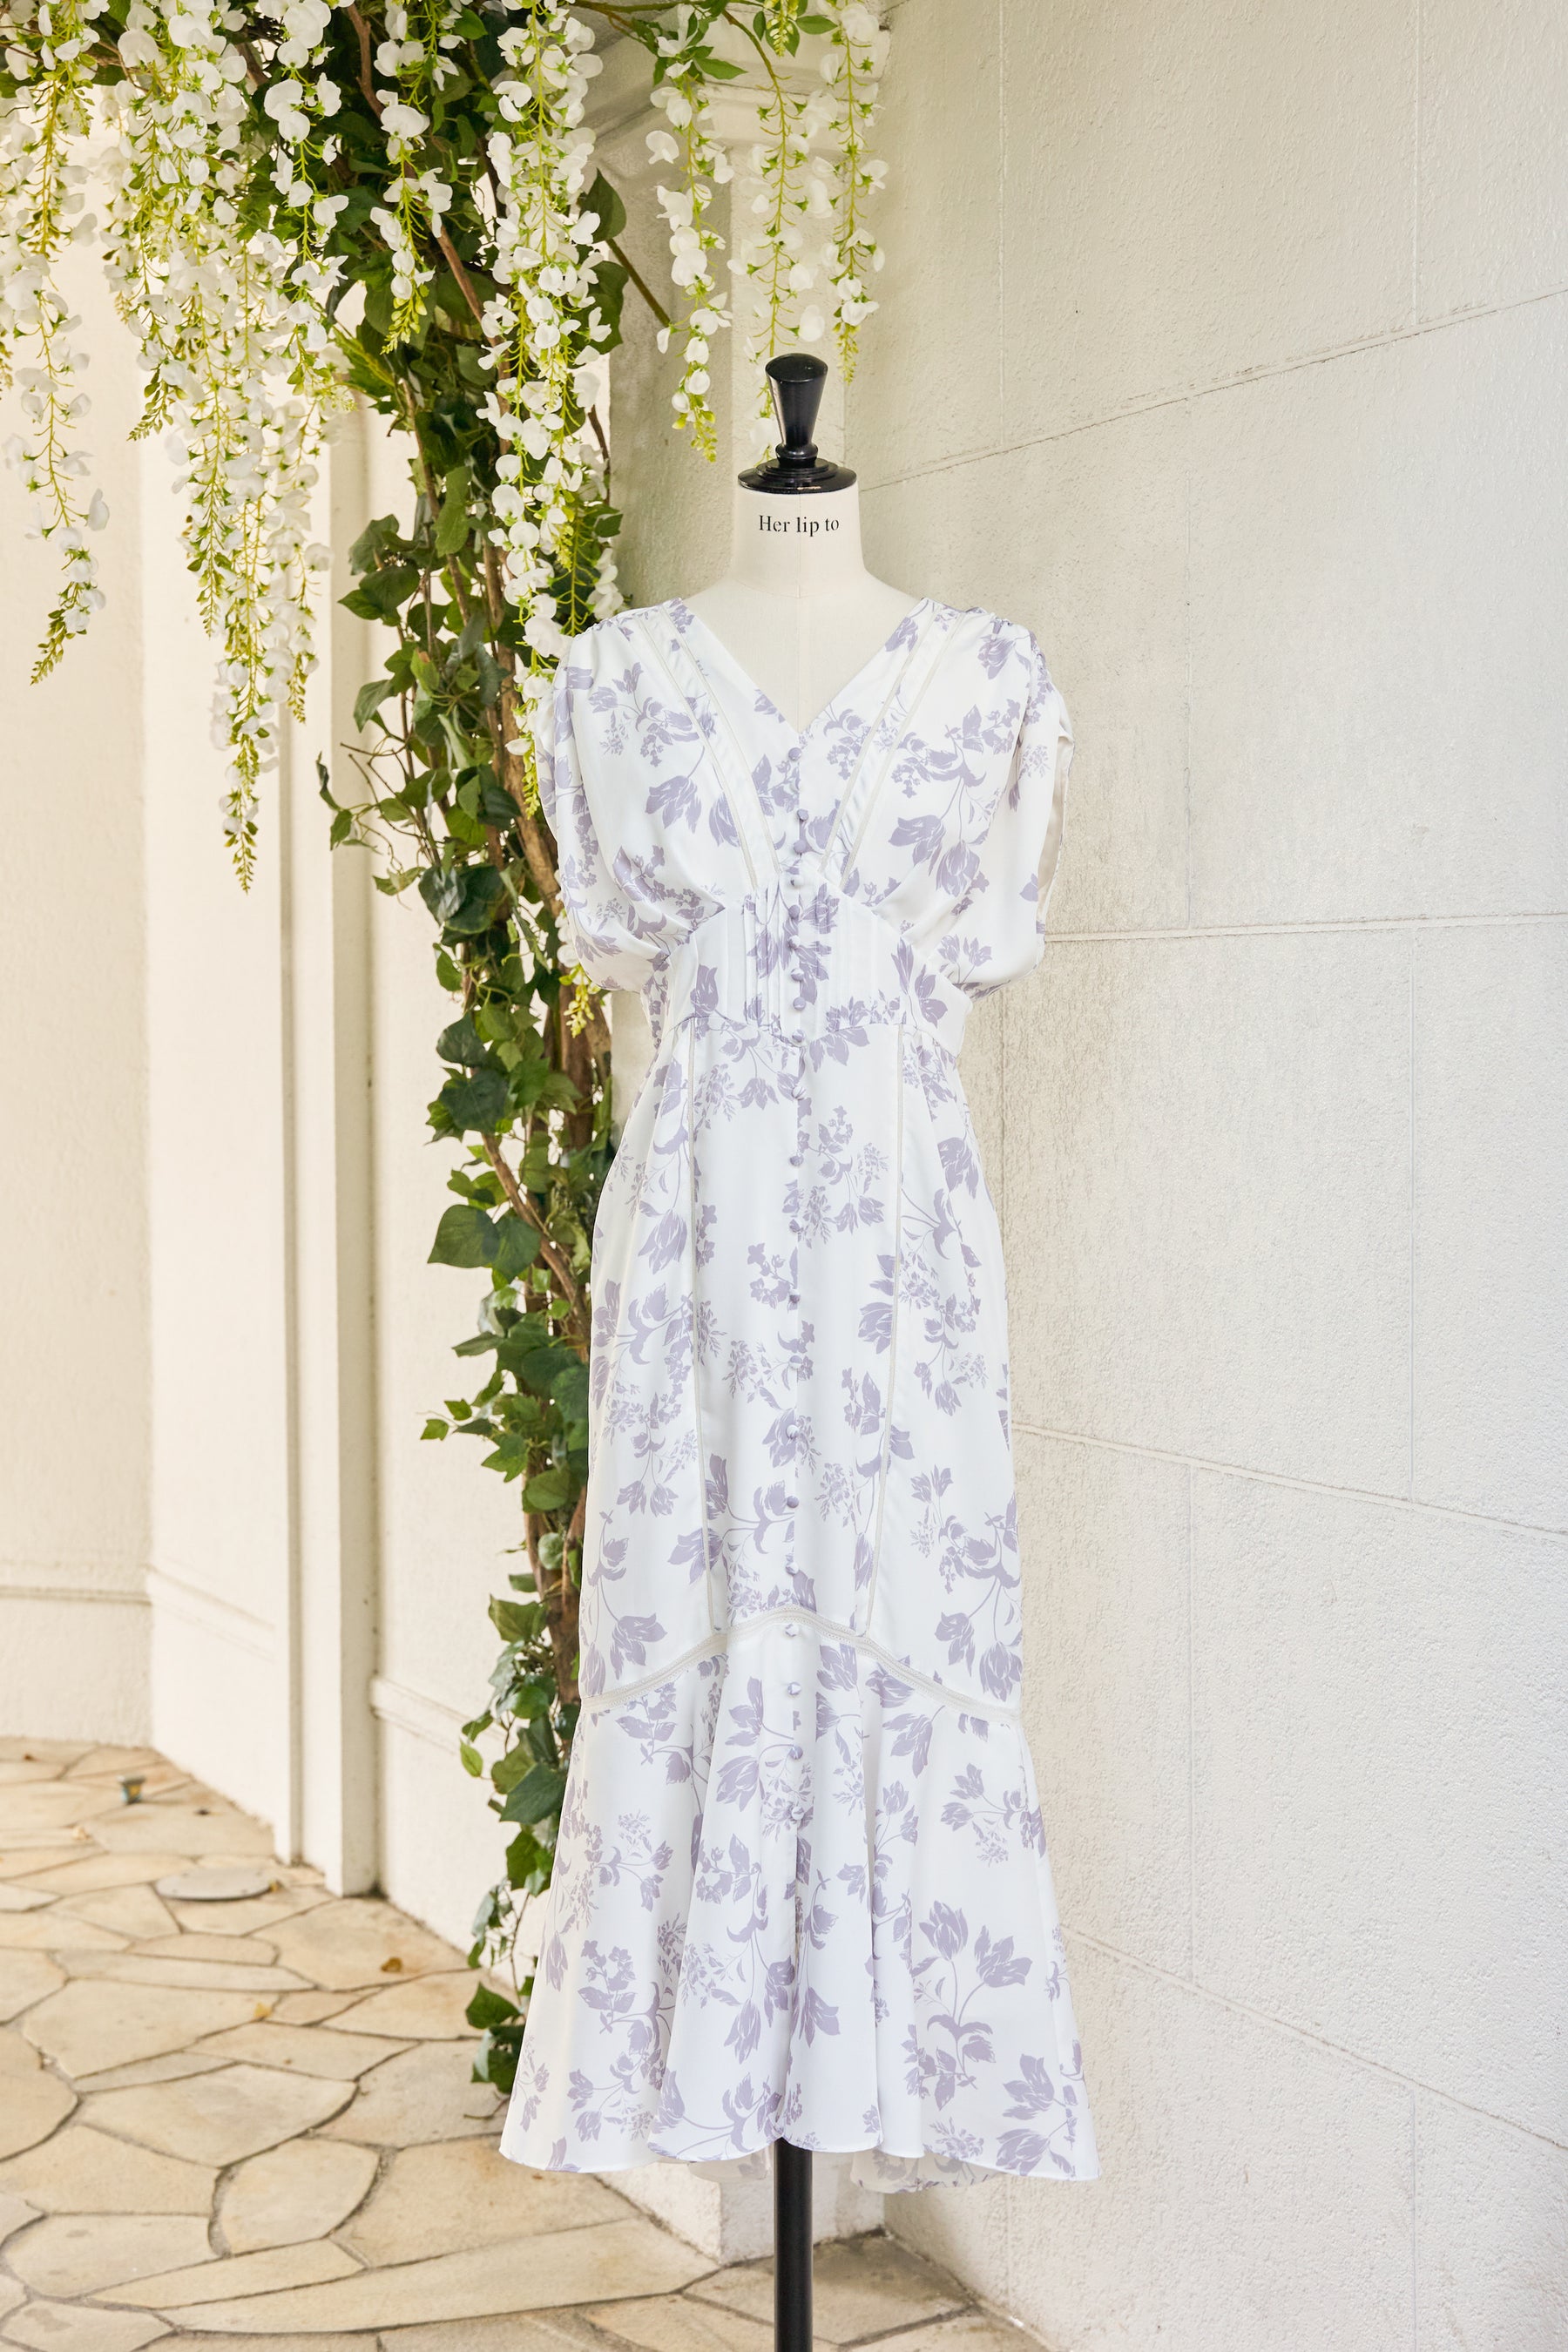 her lip to Royal Garden Floral Dress - ロングワンピース